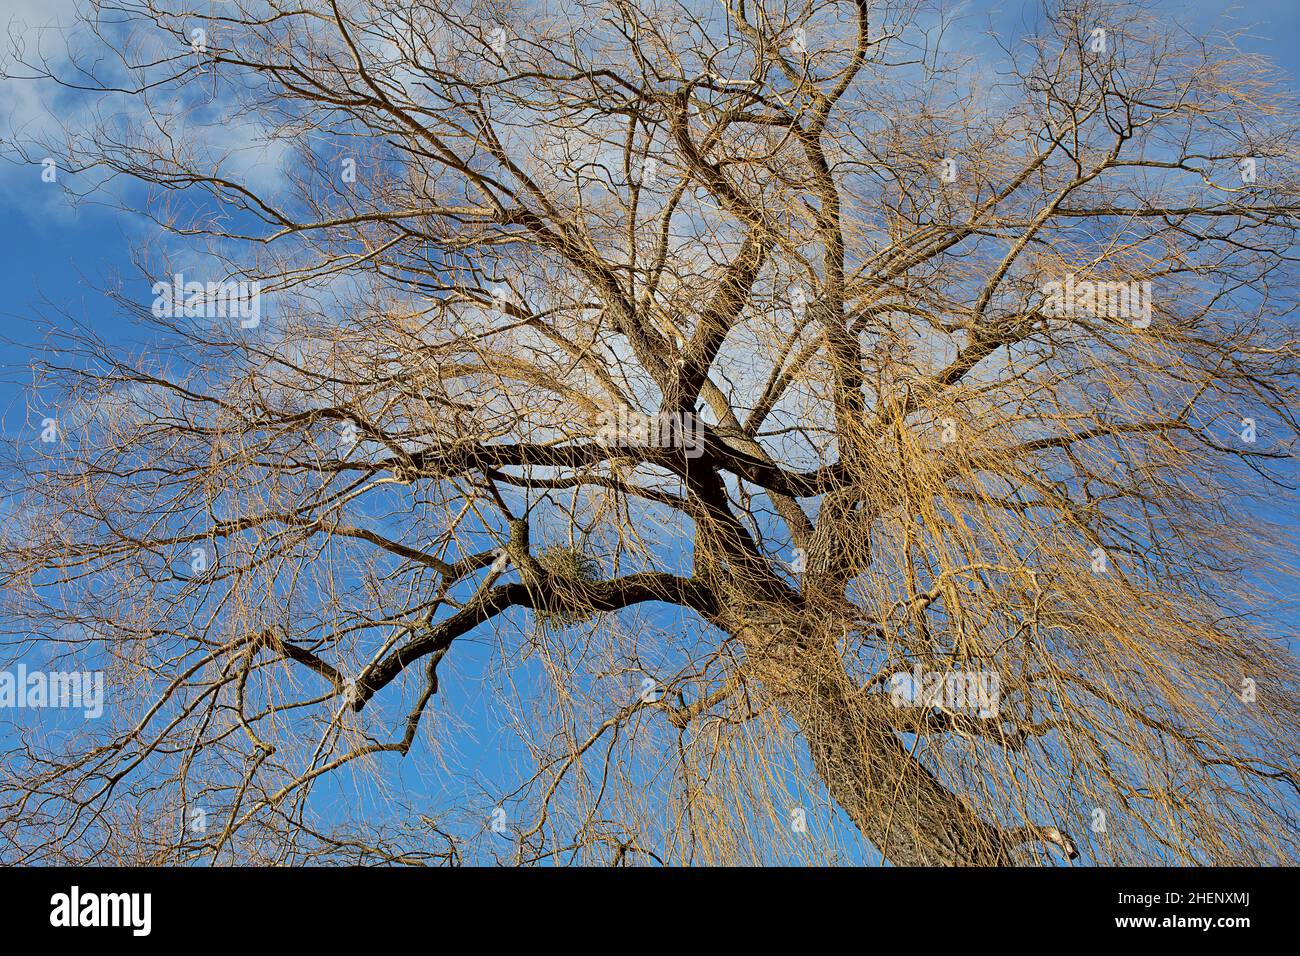 bare willow tree in winter with mistletoe against a blue sky Stock Photo